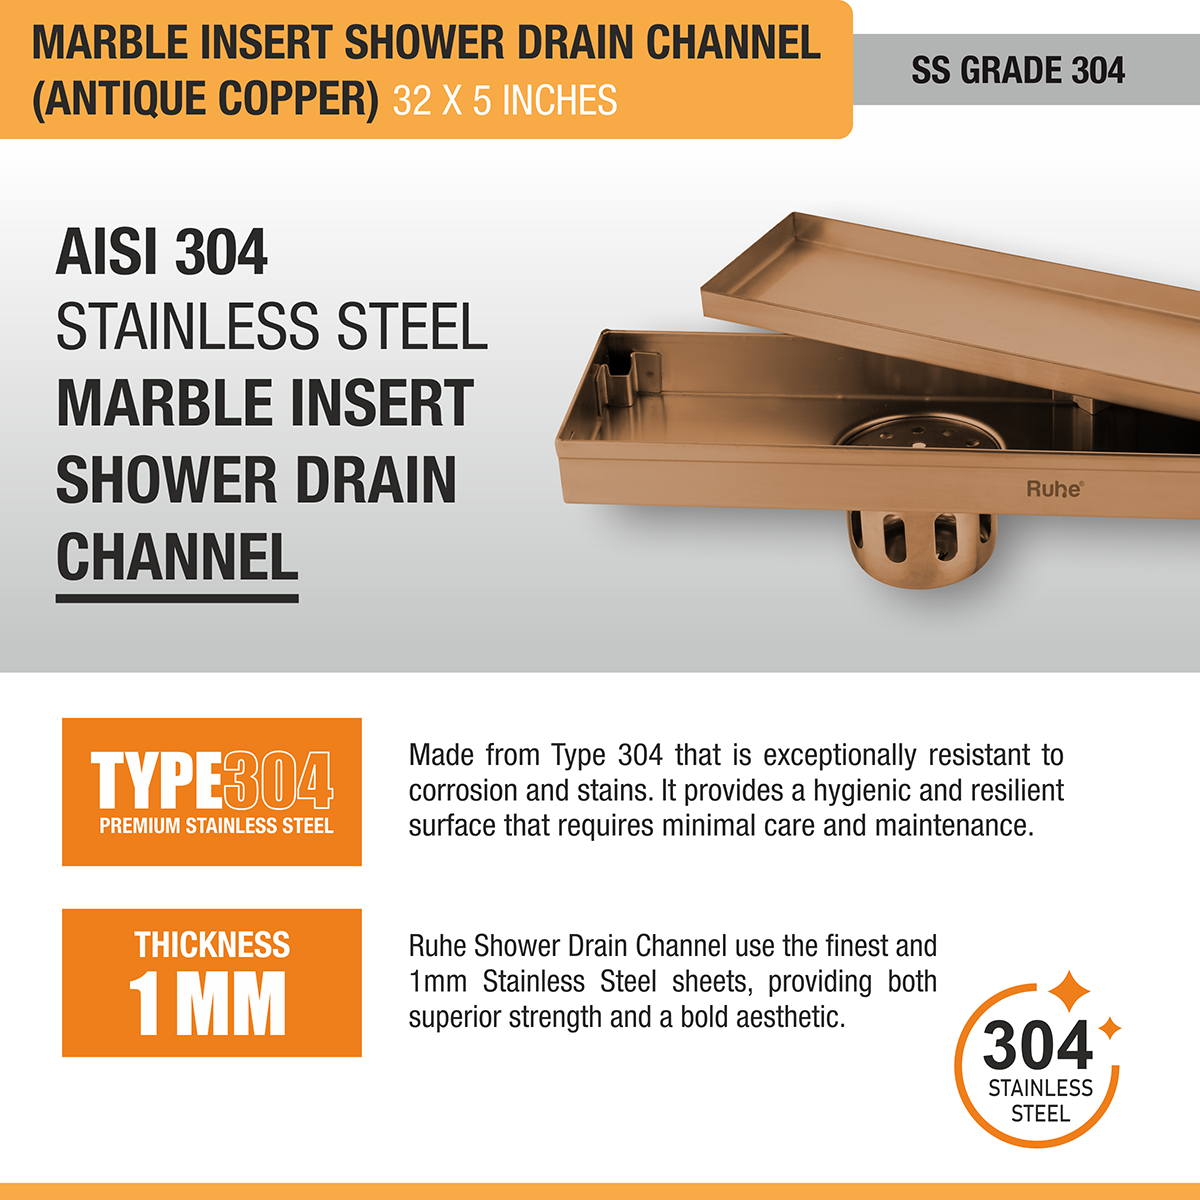 Marble Insert Shower Drain Channel (32 x 5 Inches) ROSE GOLD PVD Coated stainless steel